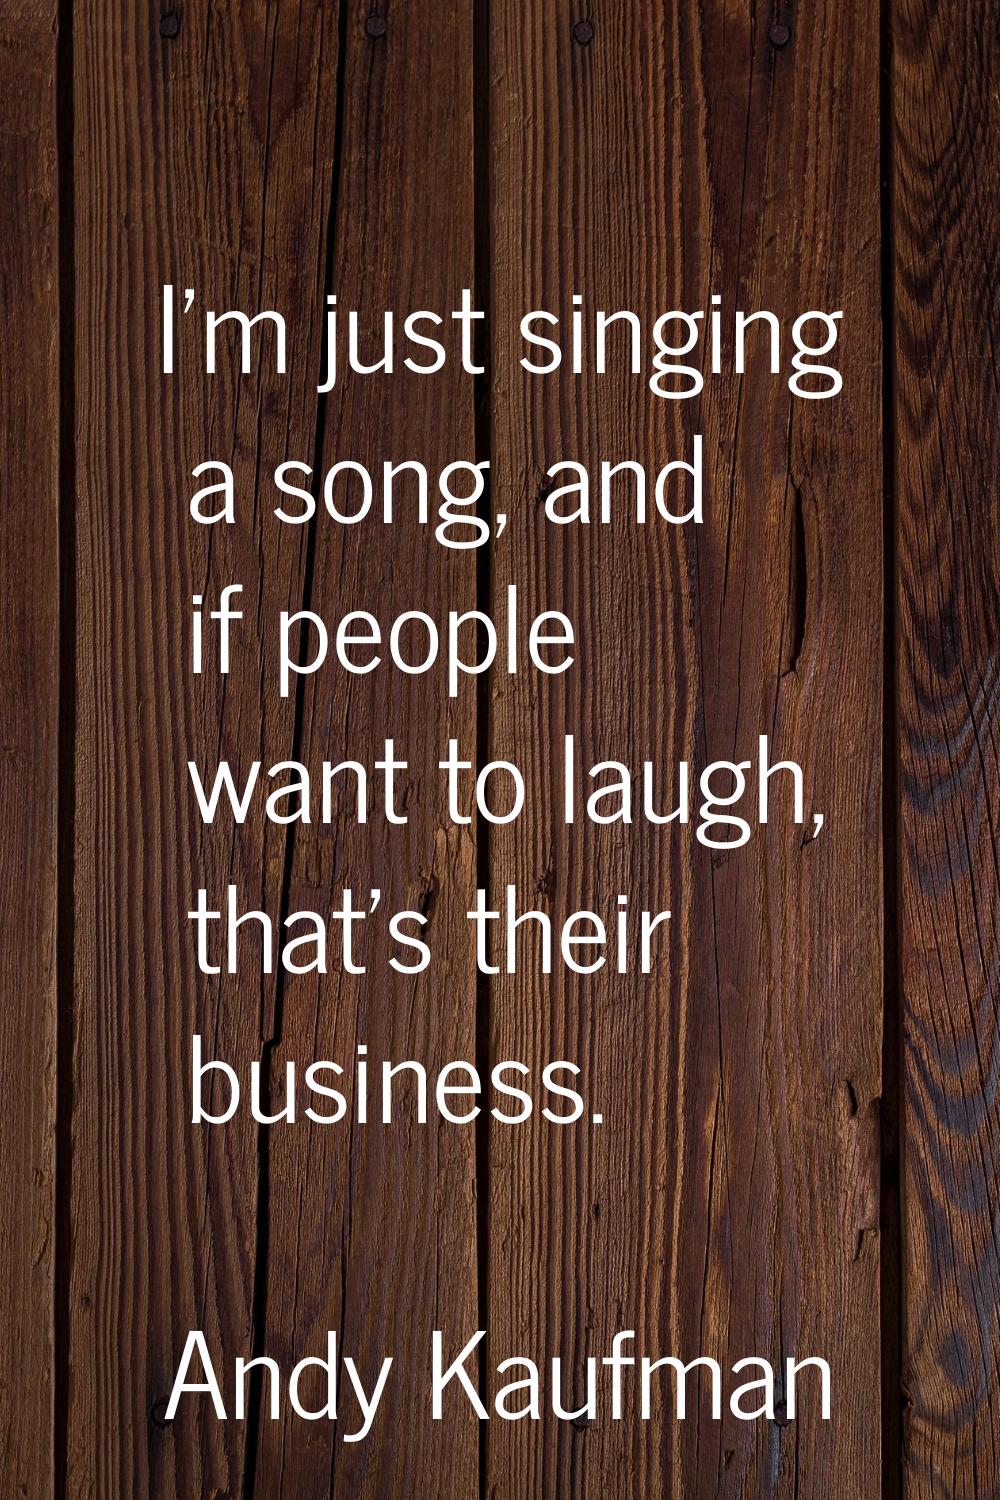 I'm just singing a song, and if people want to laugh, that's their business.